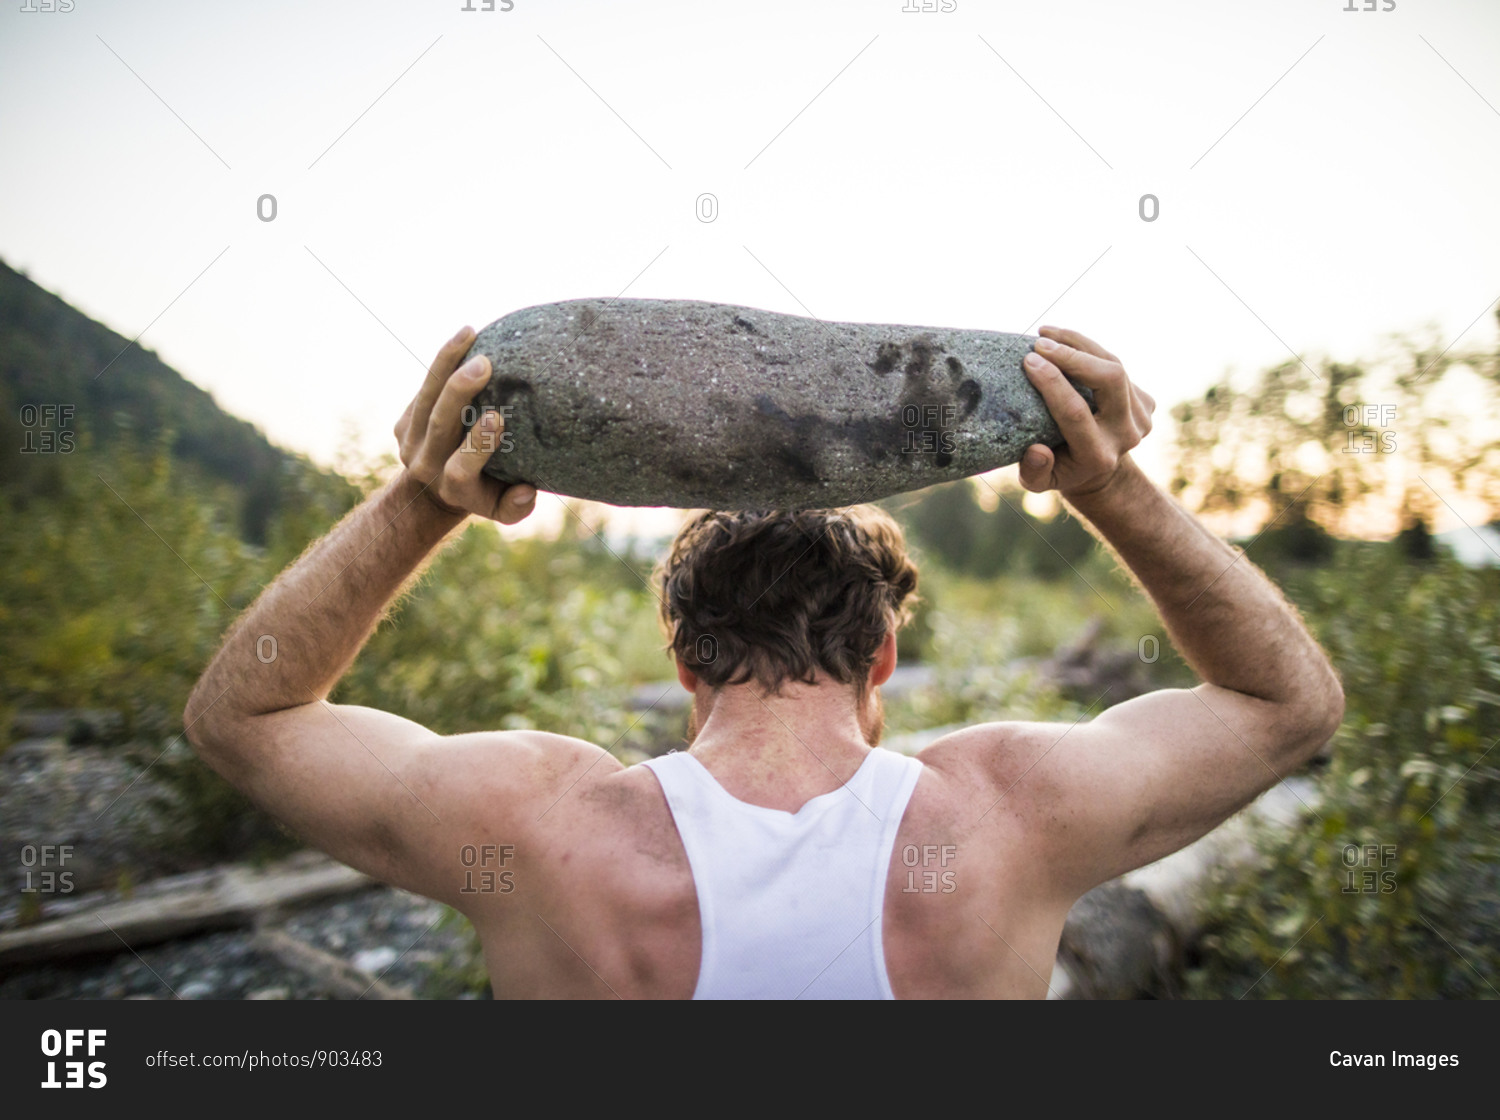 Rear view of man lifting rock above head during an outdoor workout.